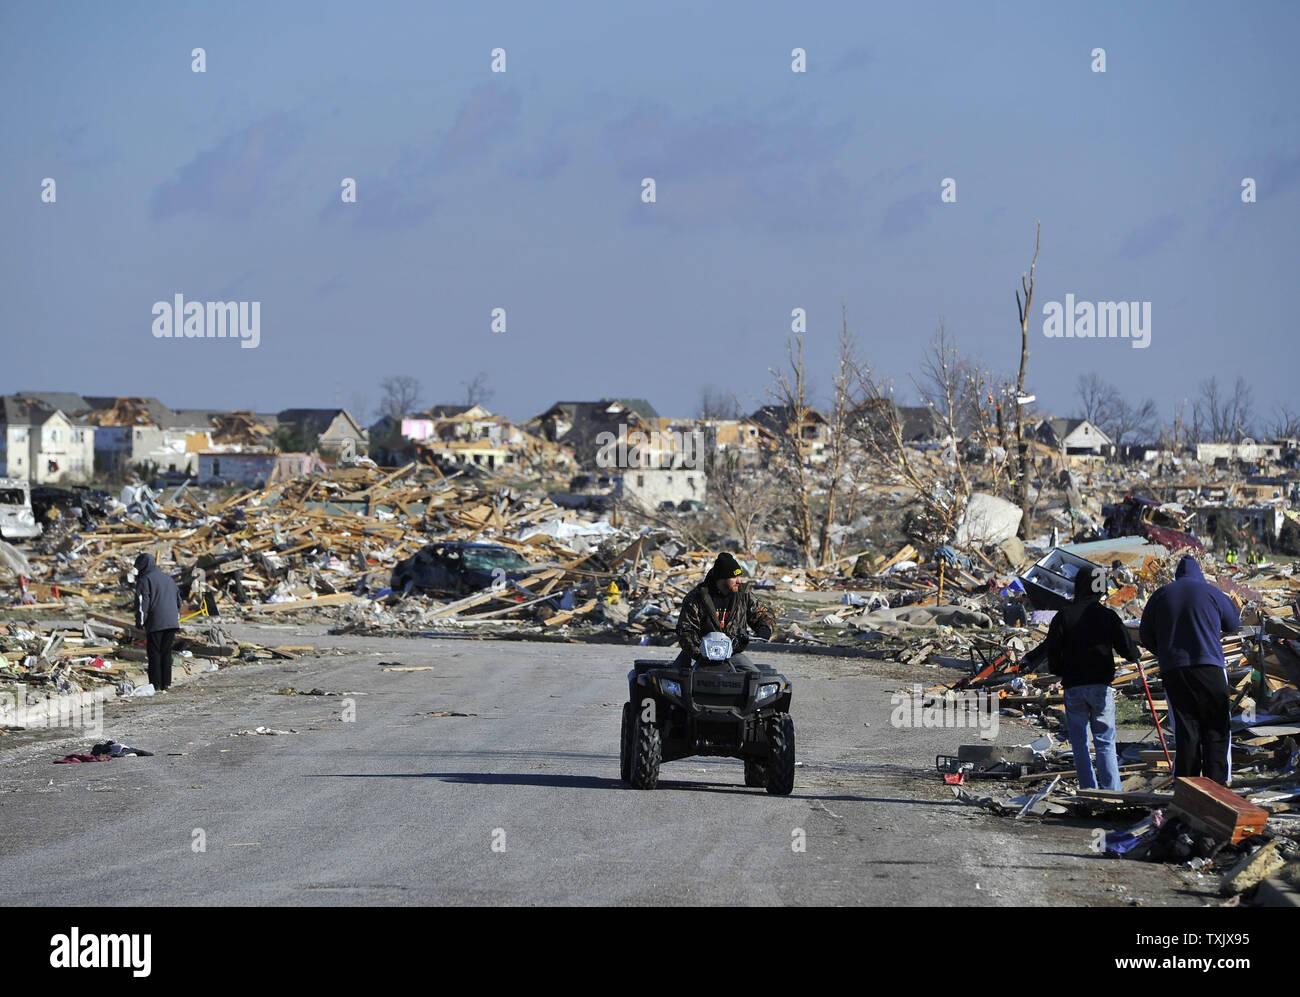 Residents sort through what is left of their homes in Washington, Illinois on November 18, 2013. Six people died and hundreds of homes were destroyed in Illinois as 81 tornadoes were sighted on November 17 throughout 12 midwest states including the EF4 tornado that struck Washington, Illinois.     UPI/Brian Kersey.     UPI/Brian Kersey Stock Photo